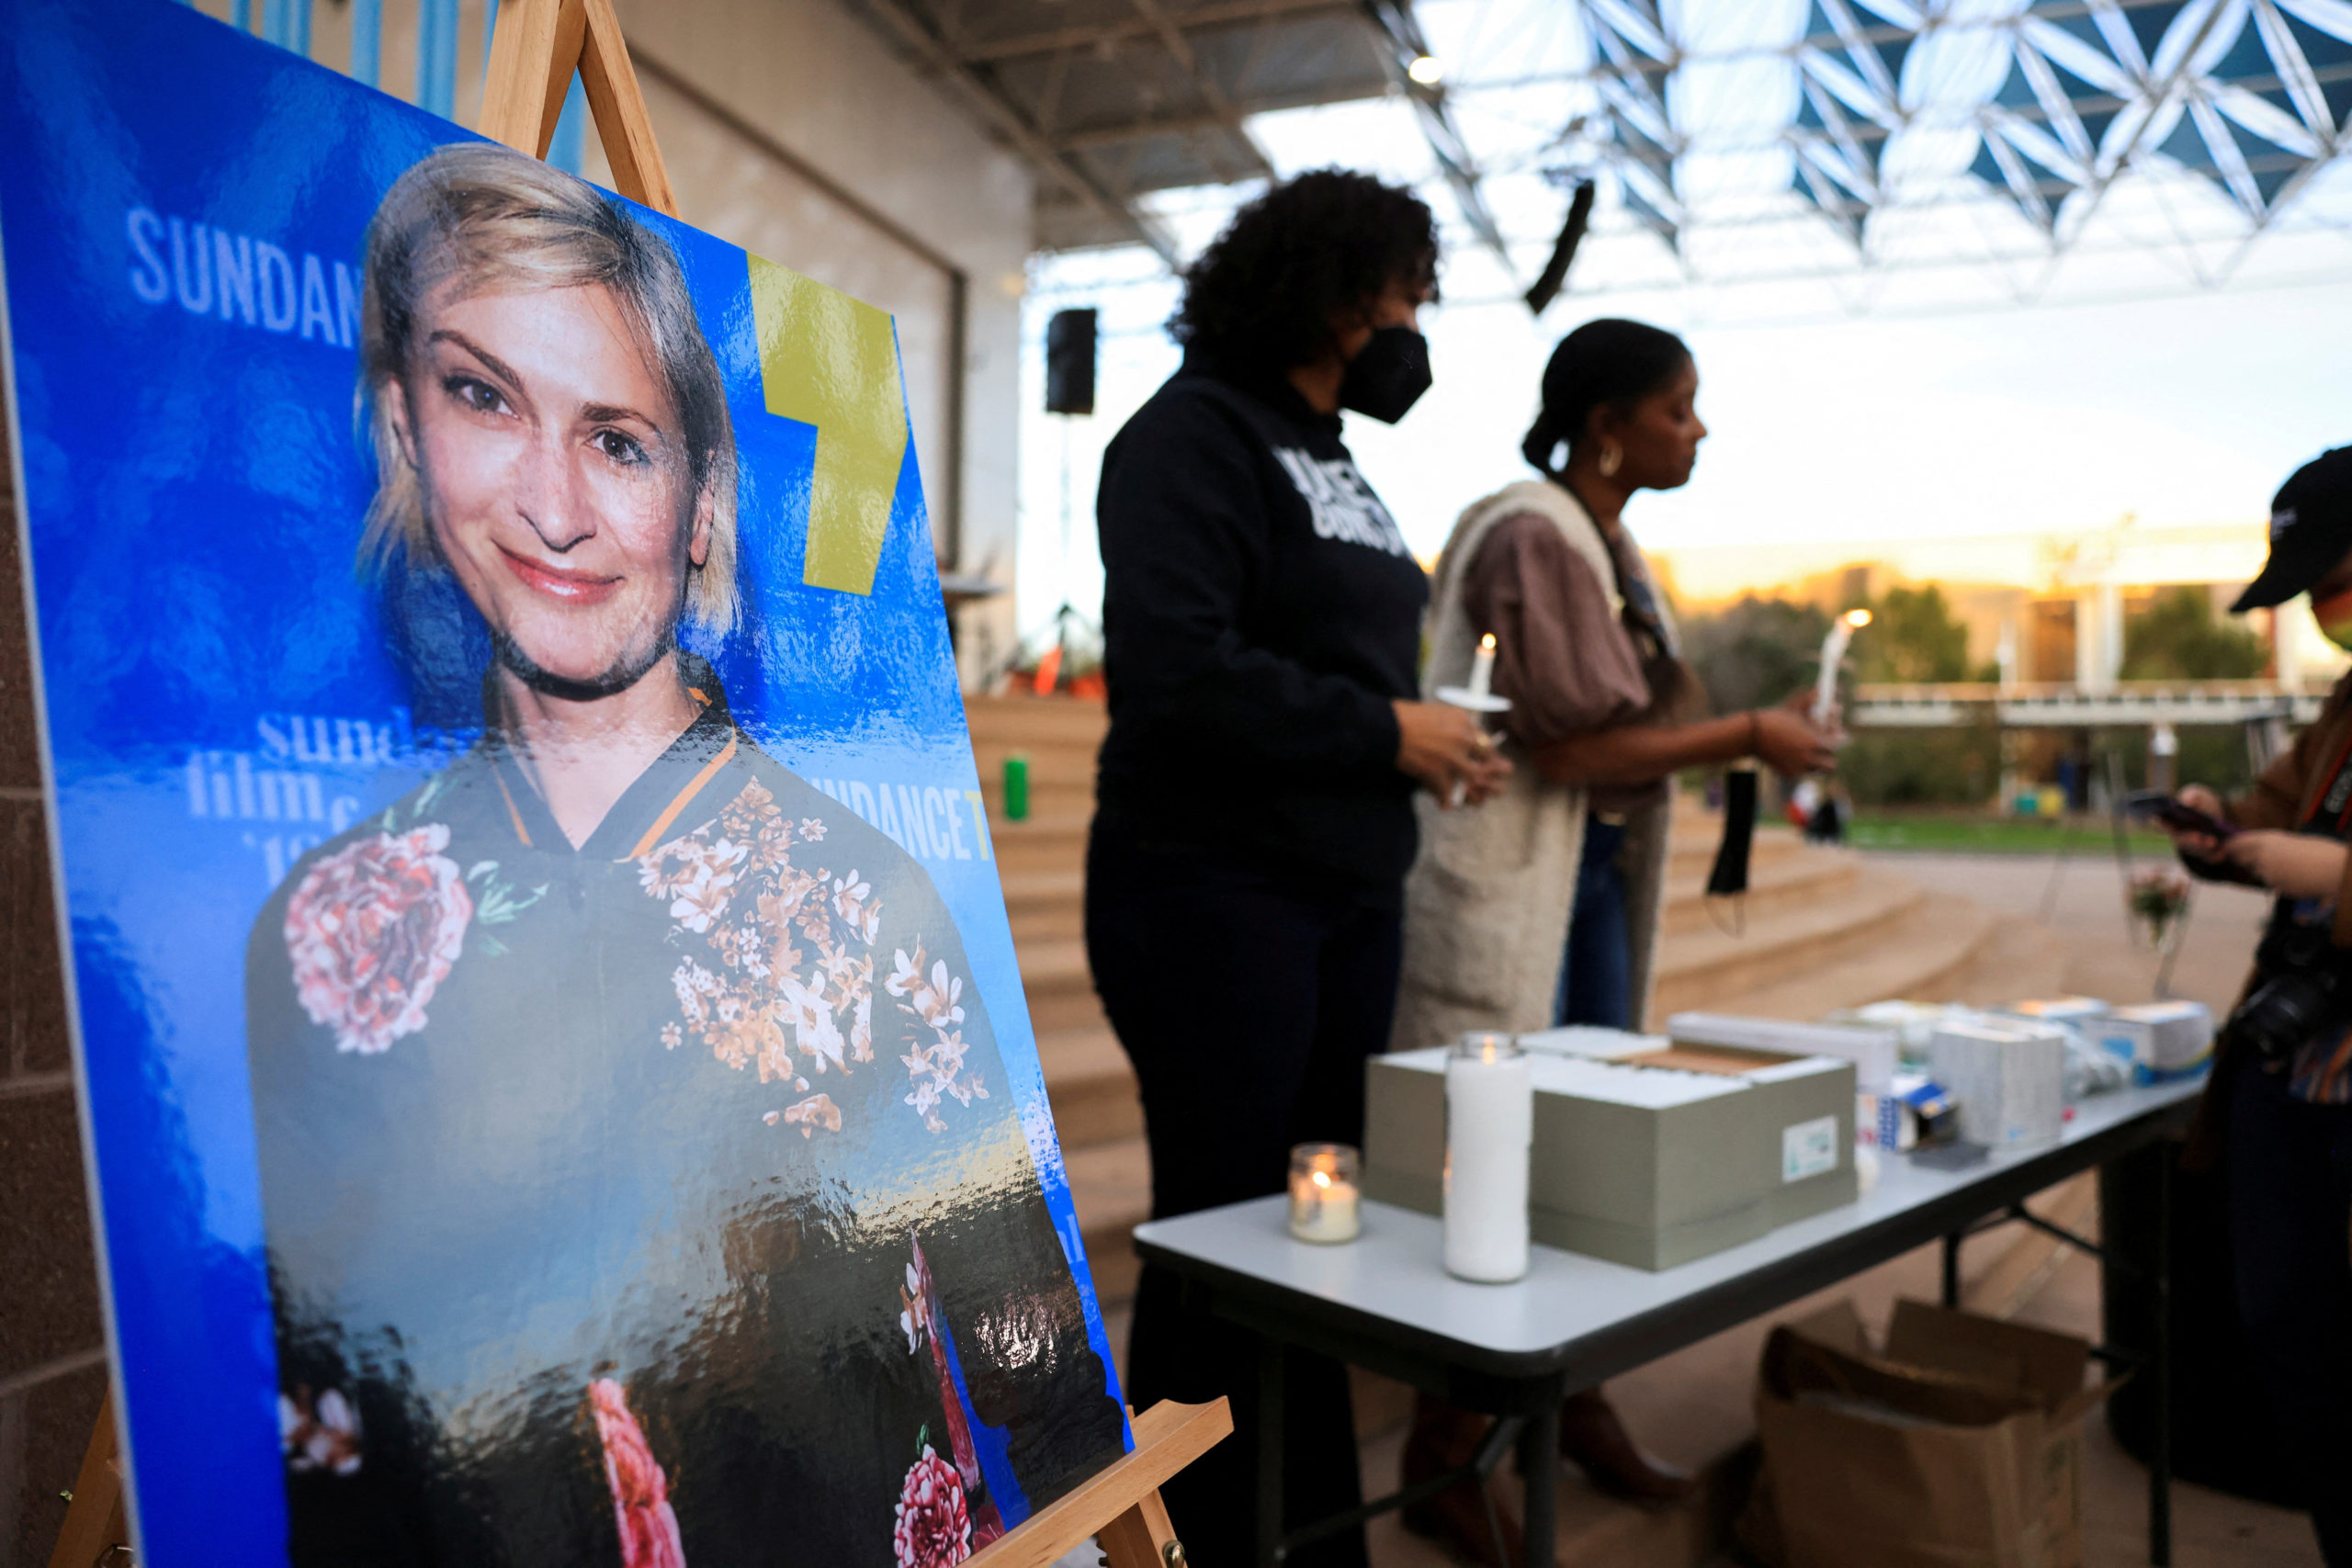 An image of cinematographer Halyna Hutchins, who died after being shot by Alec Baldwin on the set of his movie "Rust", is displayed at a vigil in her honour in Albuquerque, New Mexico, U.S., October 23, 2021.  REUTERS/Kevin Mohatt/File Photo